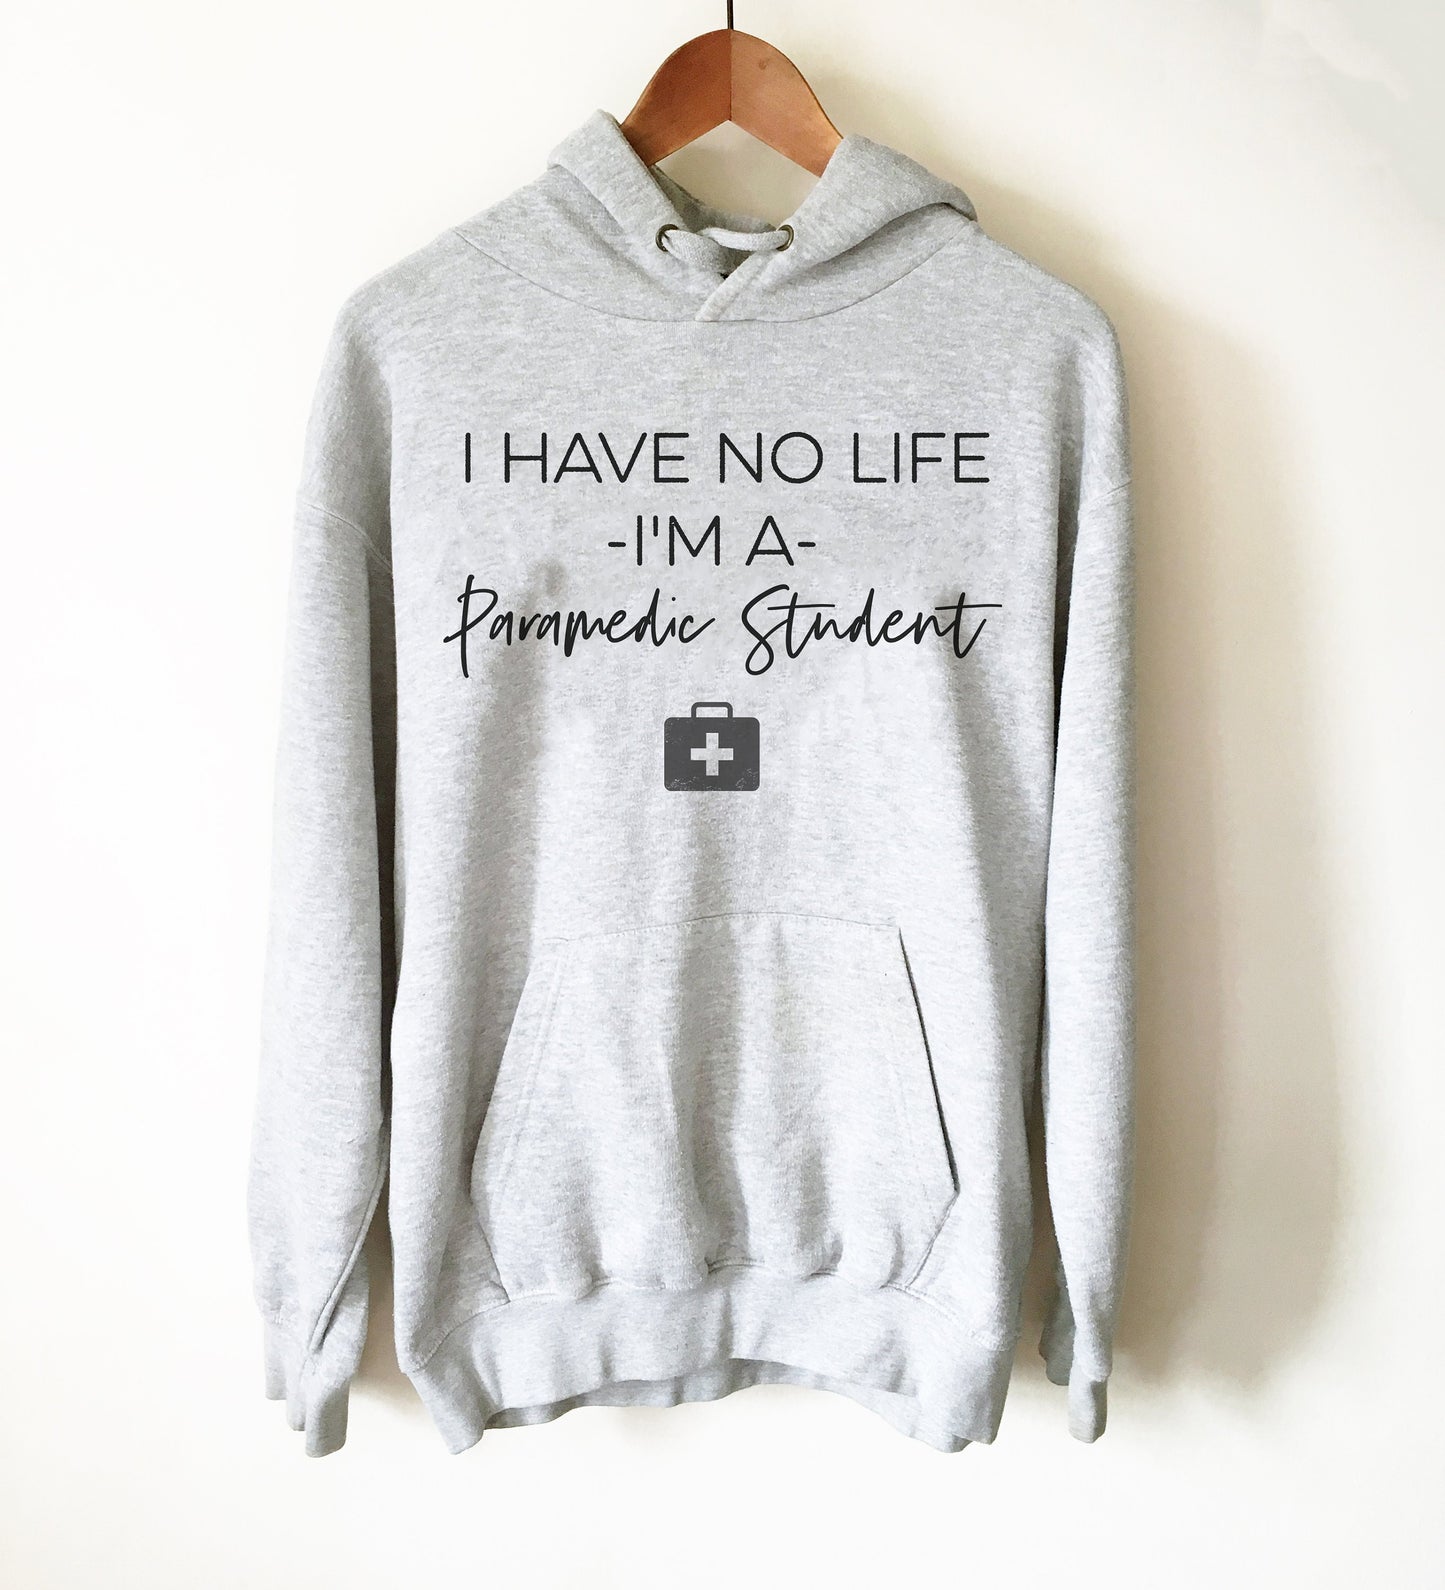 I Have No Life I'm A Paramedic Student Hoodie- Paramedic Shirt, Paramedic Gift, EMT Gifts, EMT Shirt, First Responder Gift, Paramedic School